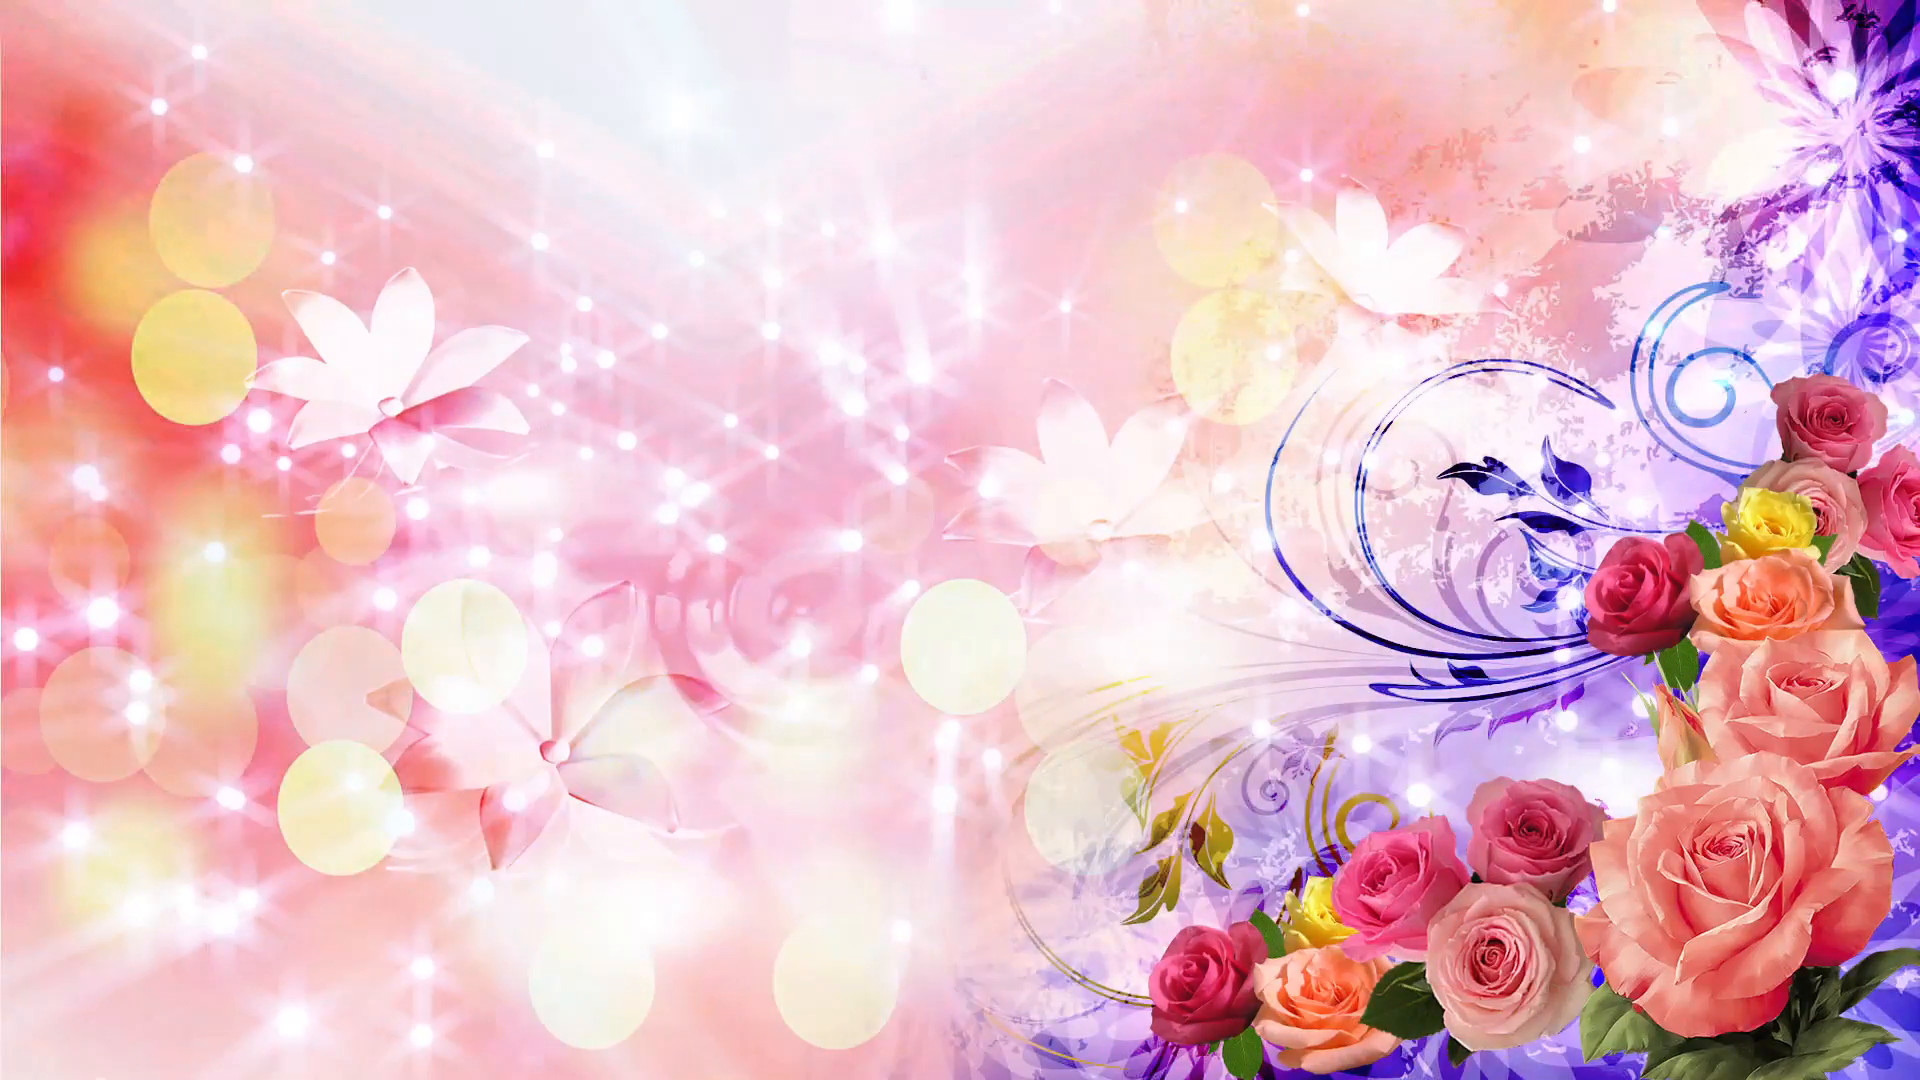 1920x1080 Pink Flowers 3 - Abstract Wedding Background 11 Stock Video Footage -  VideoBlocks